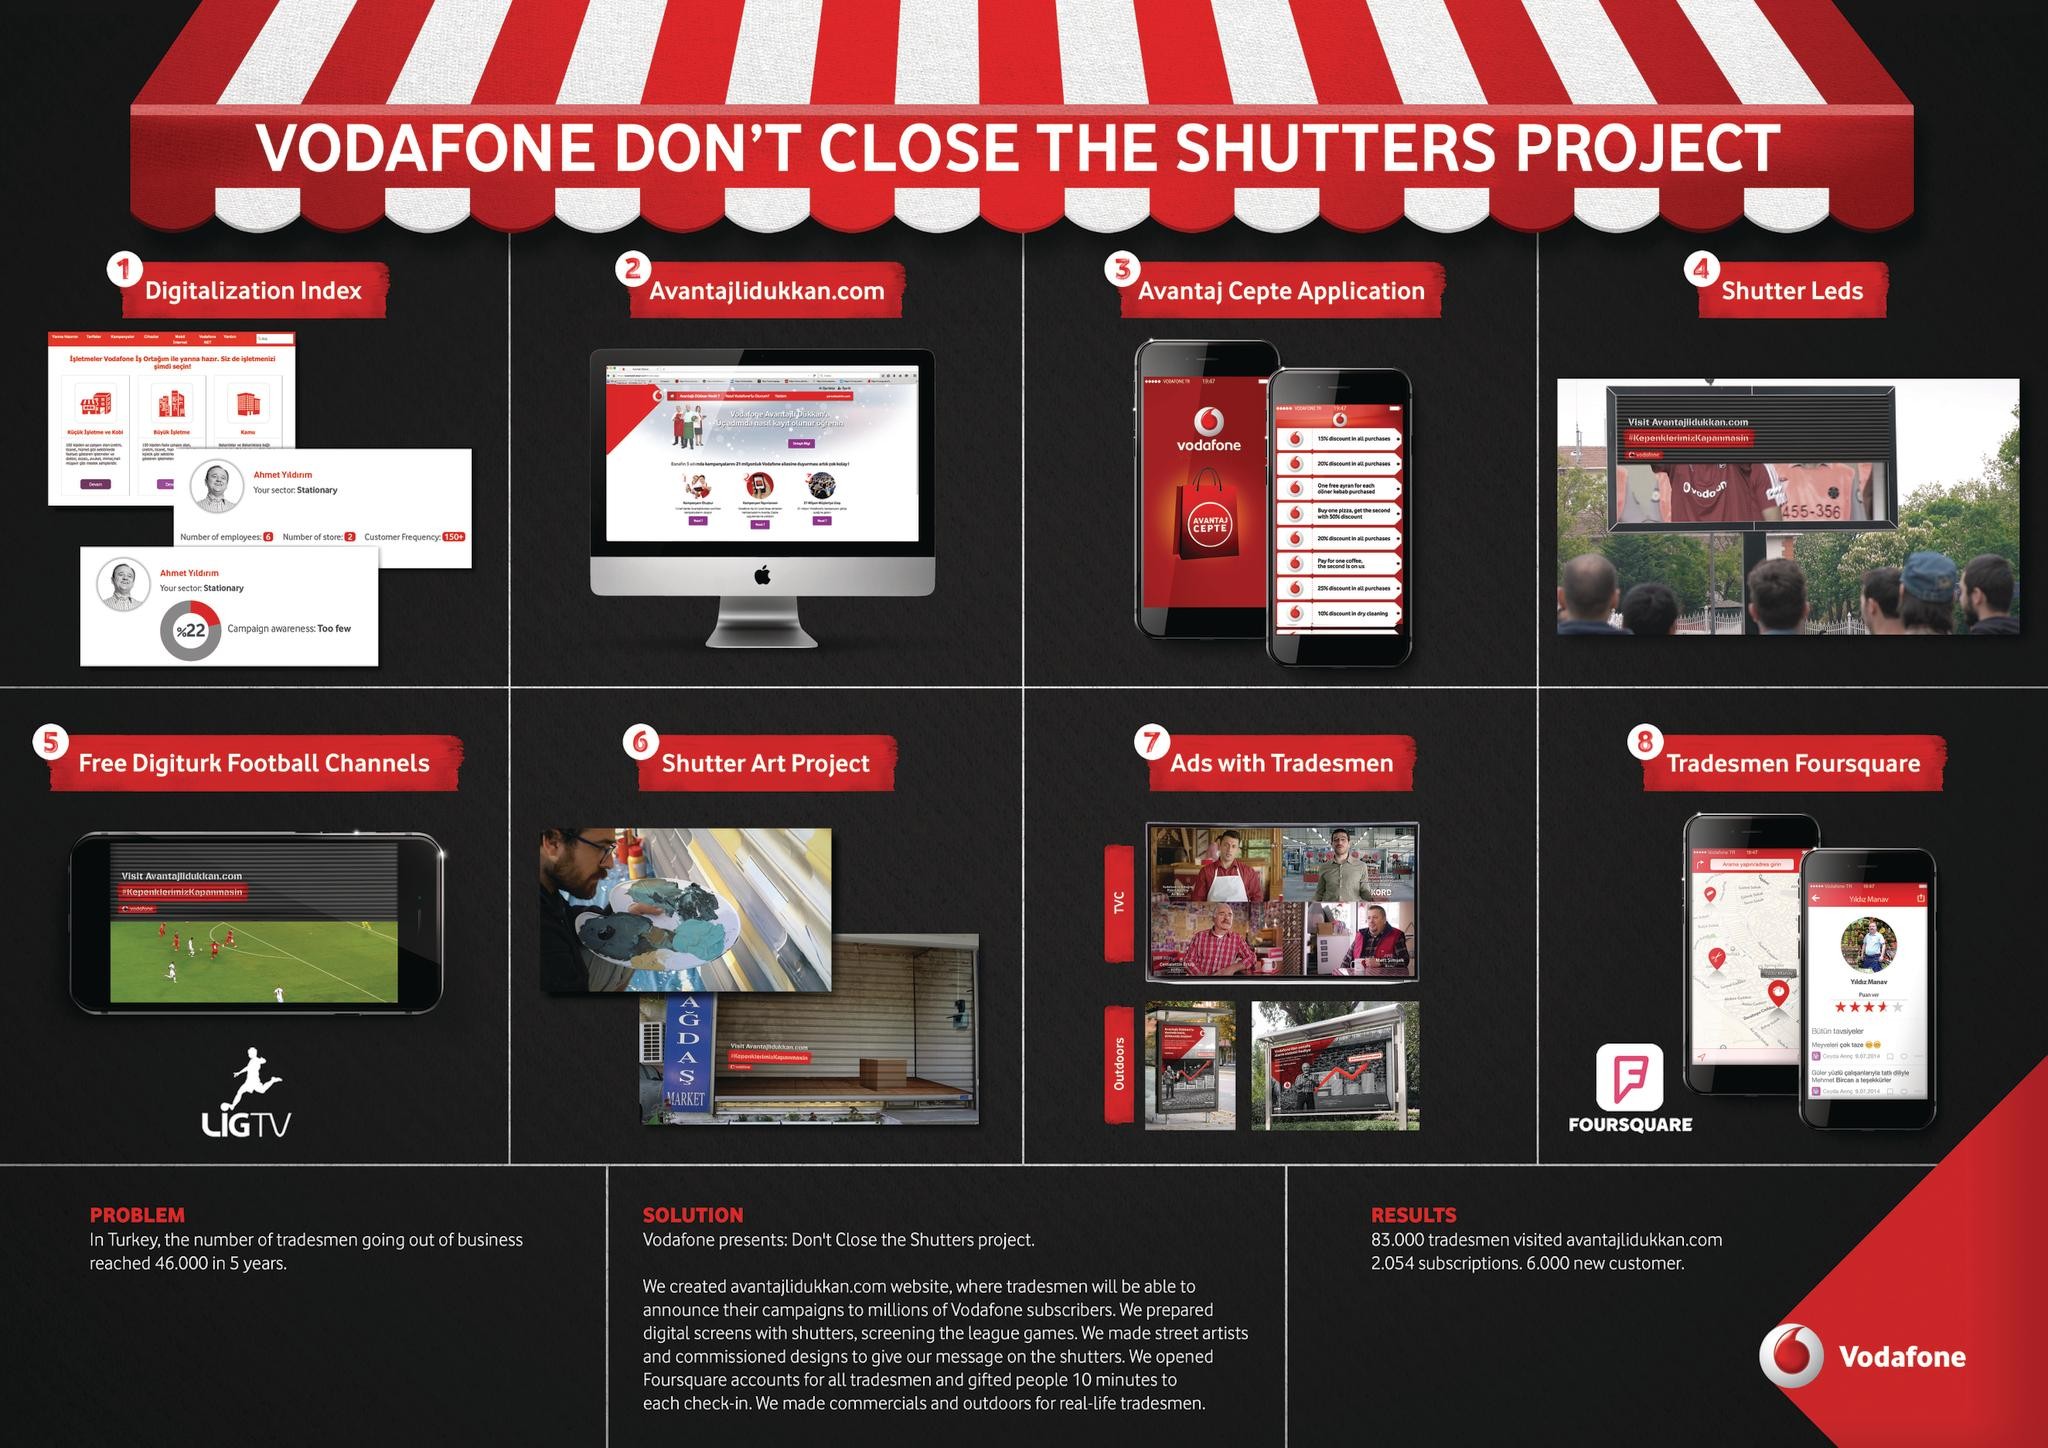 Vodafone "Don't Close The Shutters" project